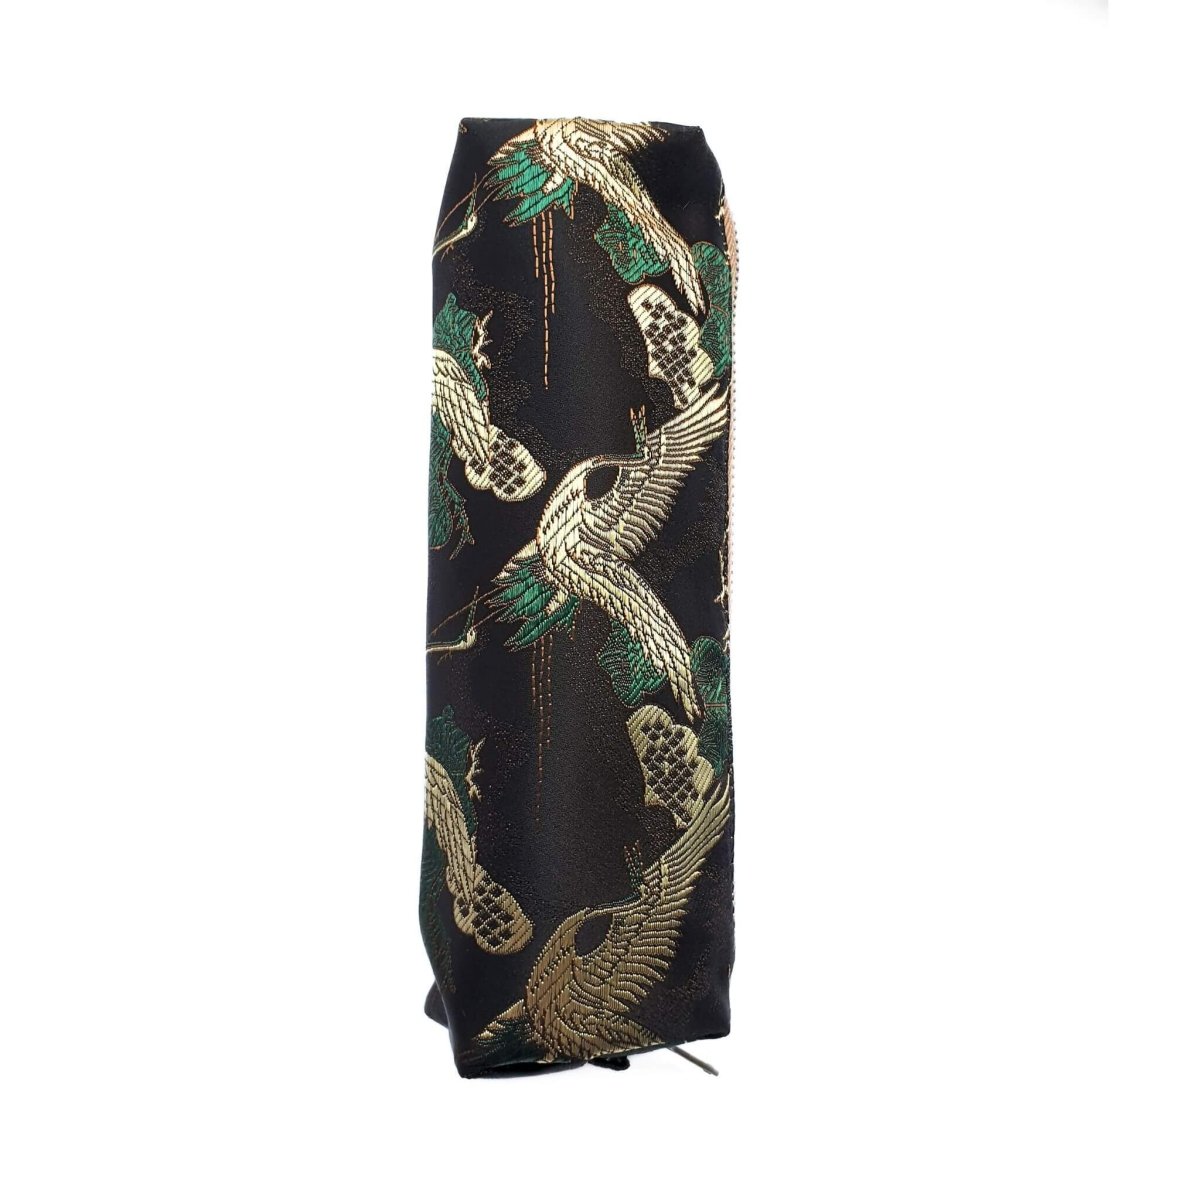 black, gold and green satin pencil case with chinoiserie design